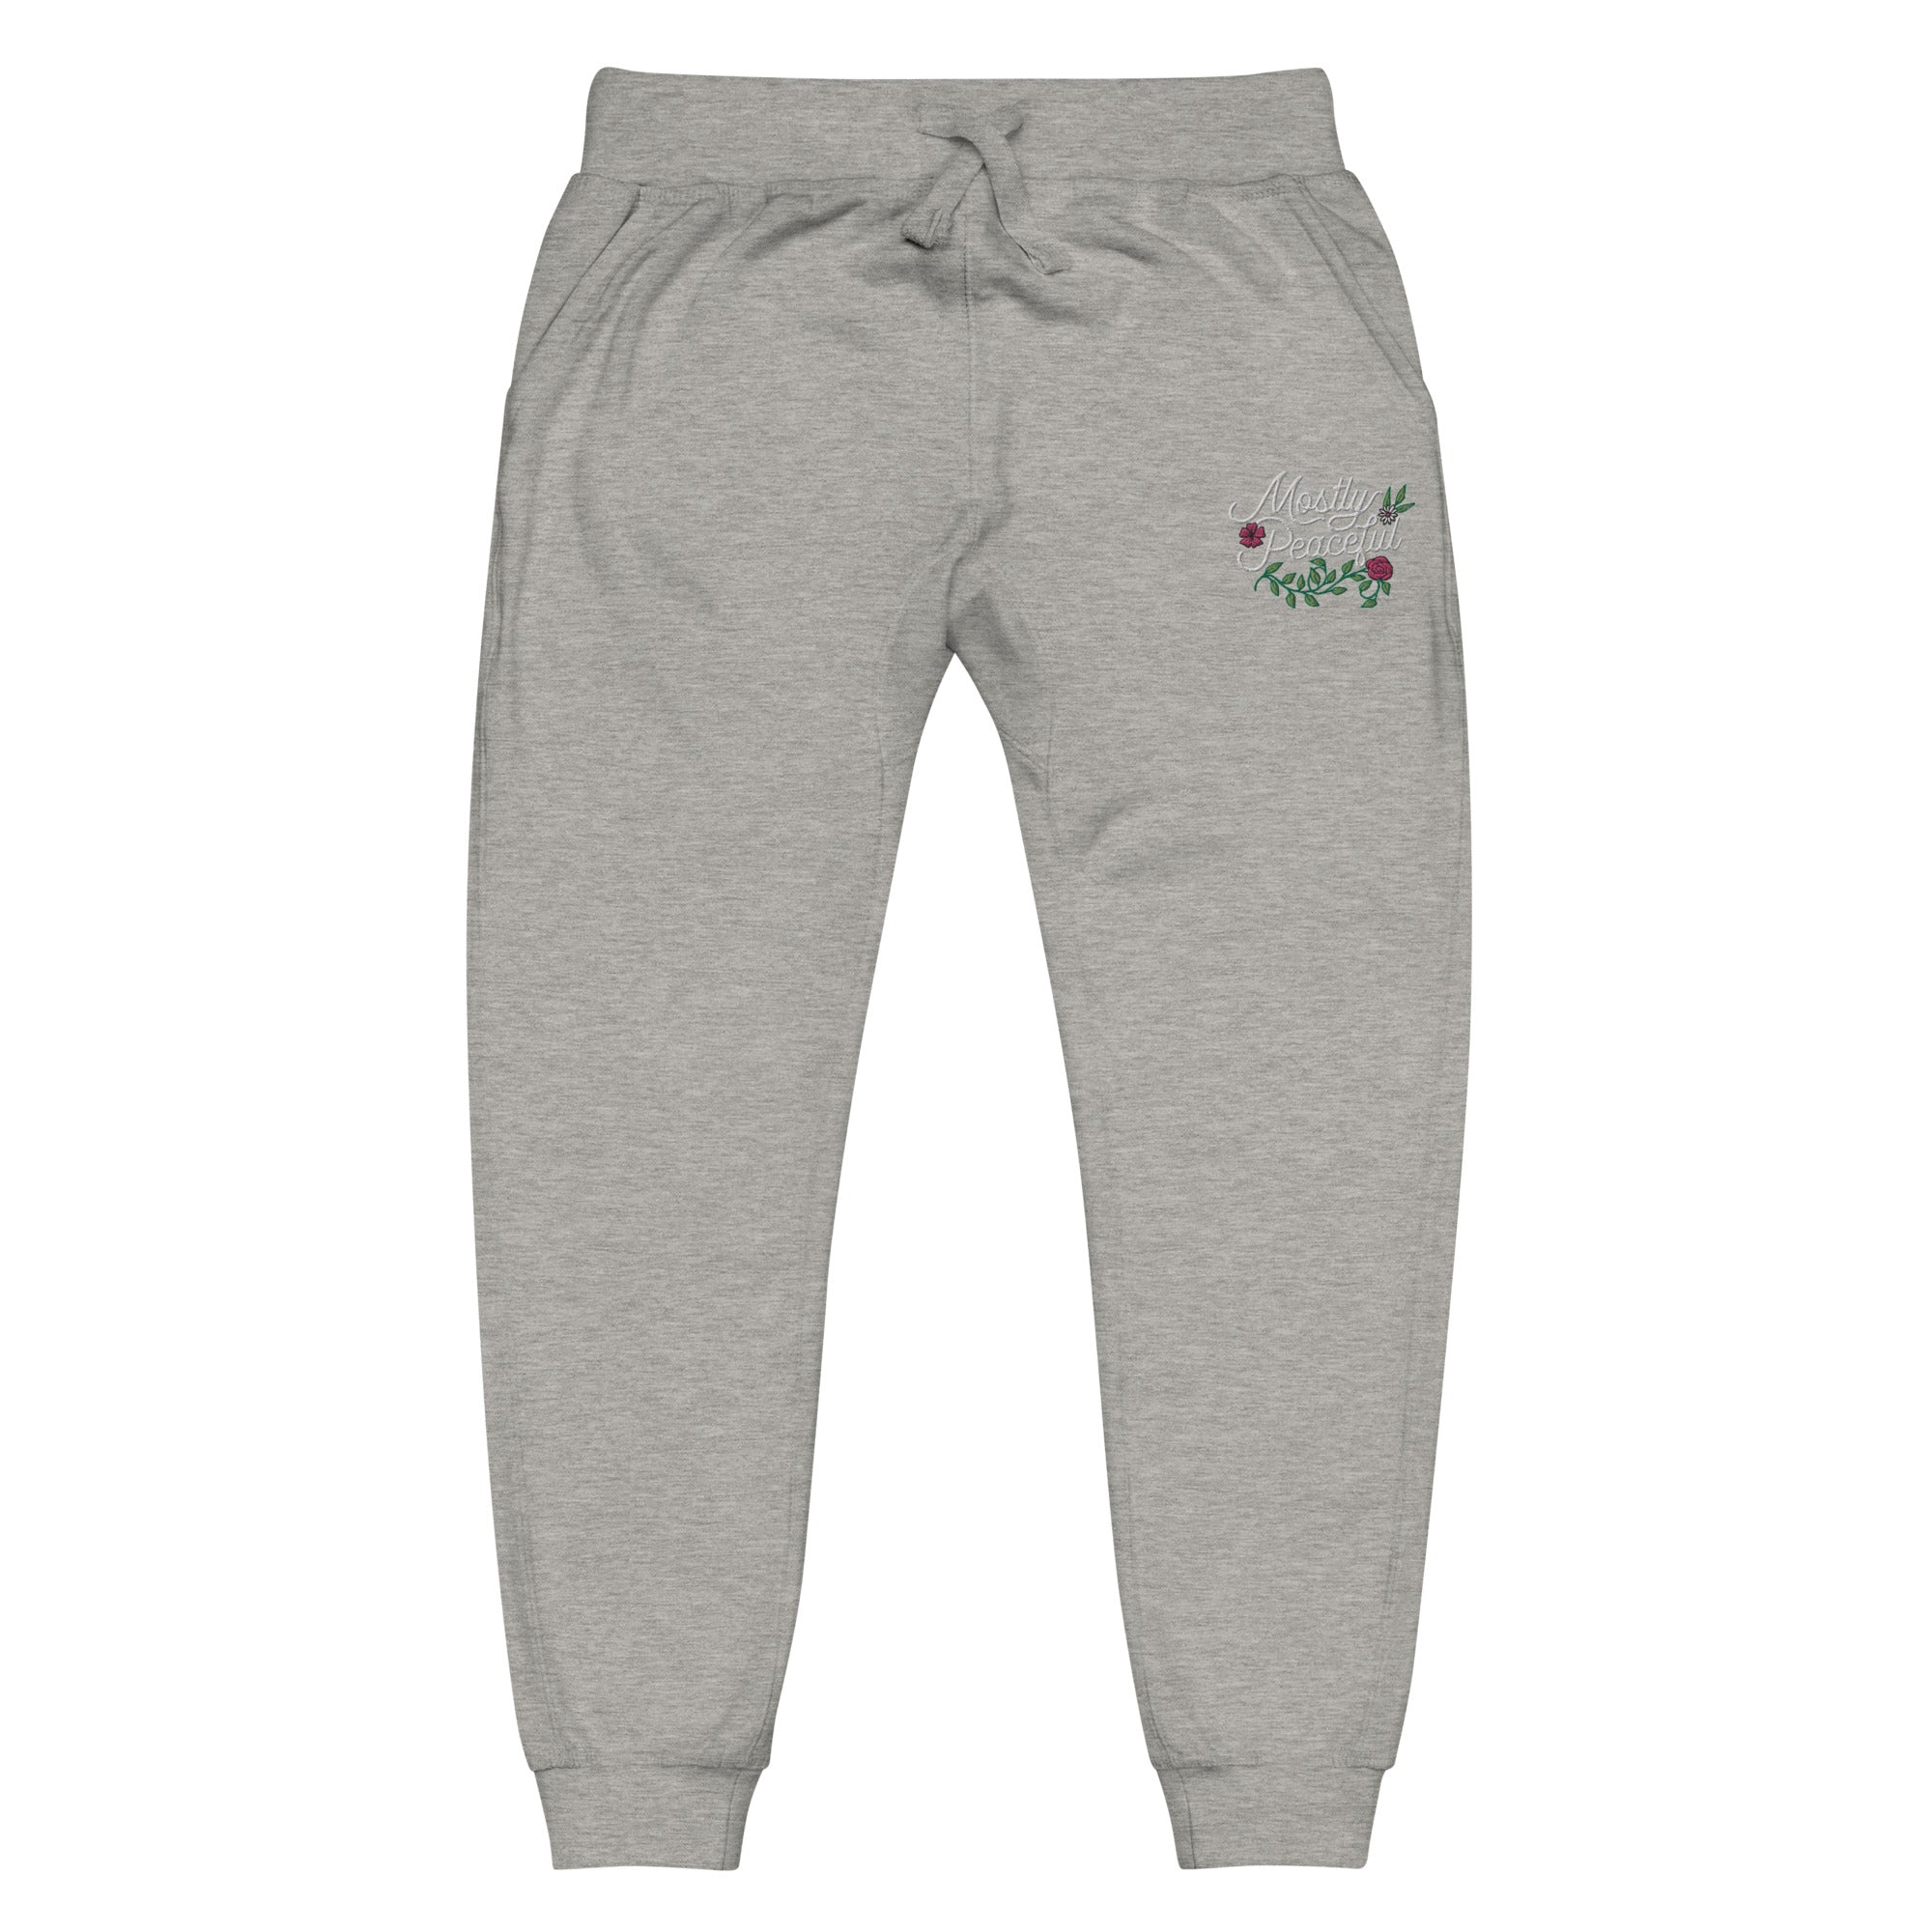 Mostly Peaceful Embroidered Fleeece Sweatpants